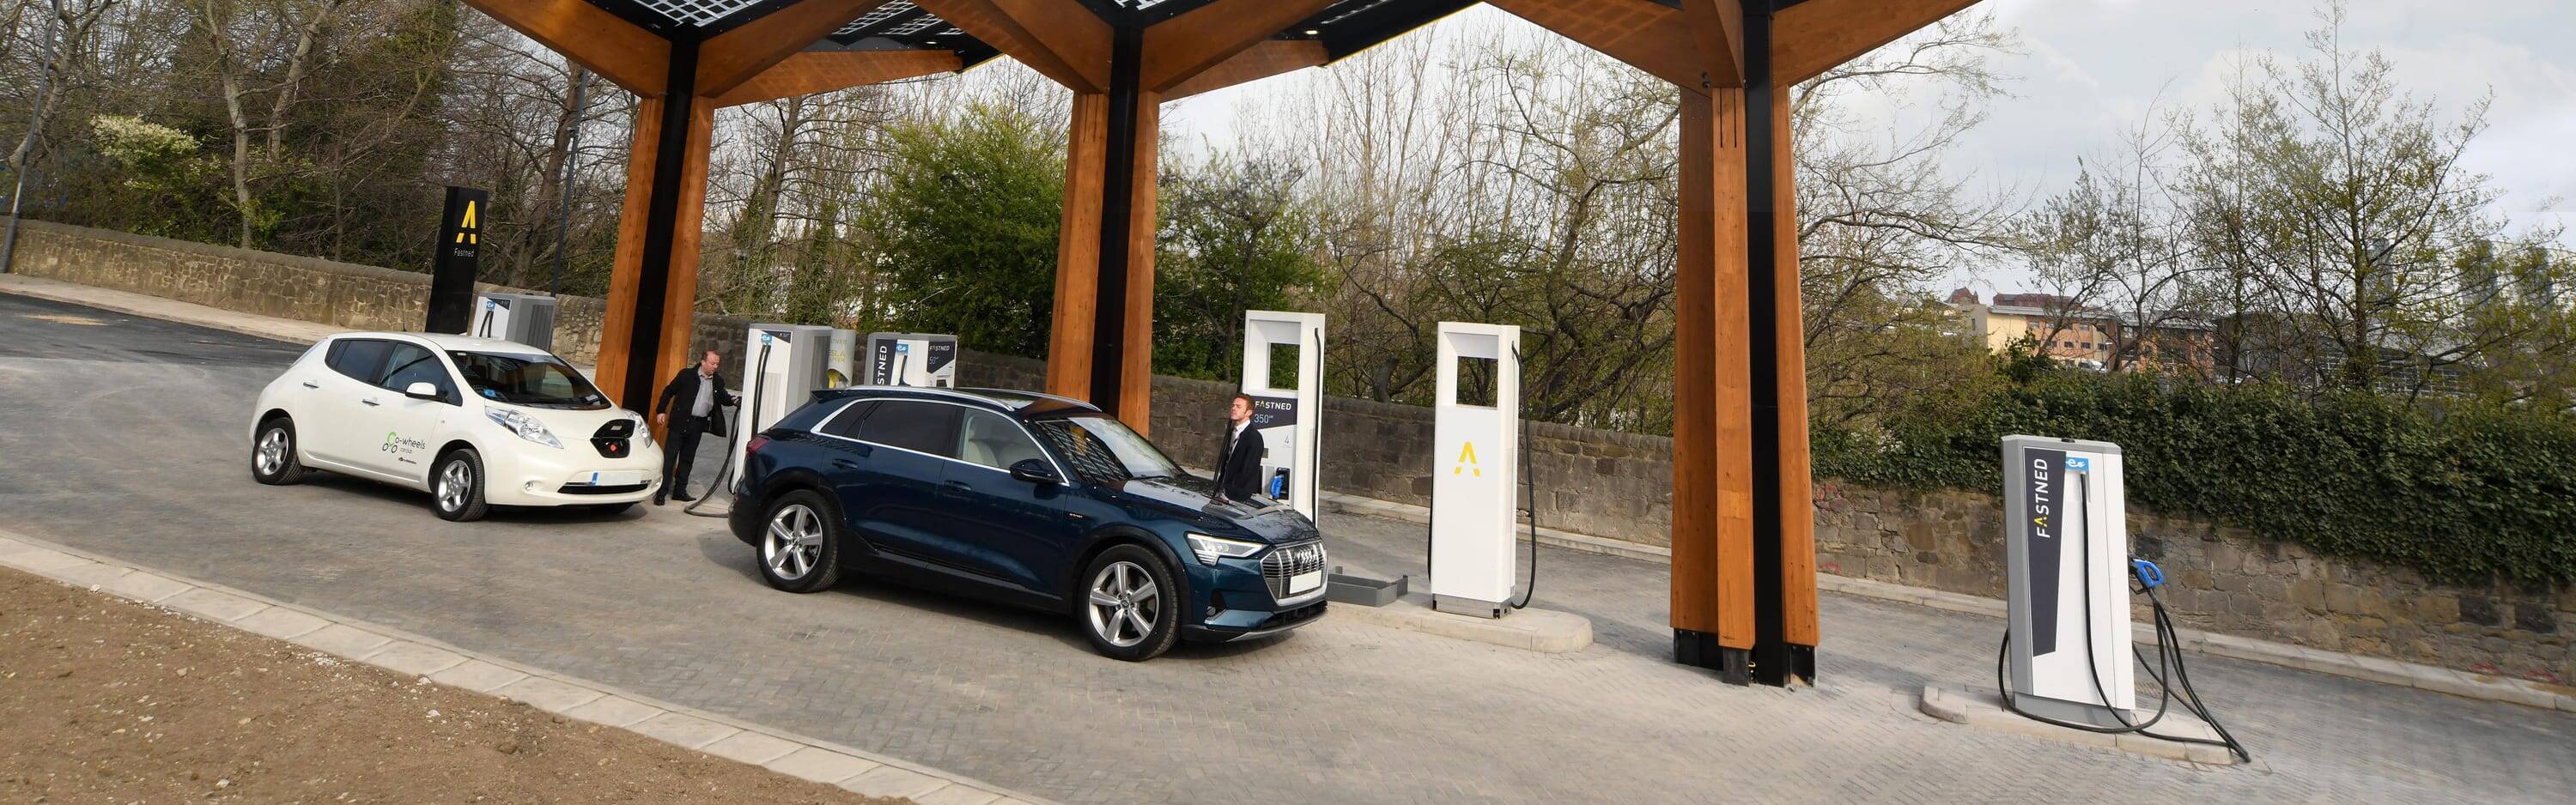 Dutch firm opens 350kW fast charging station in Sunderland